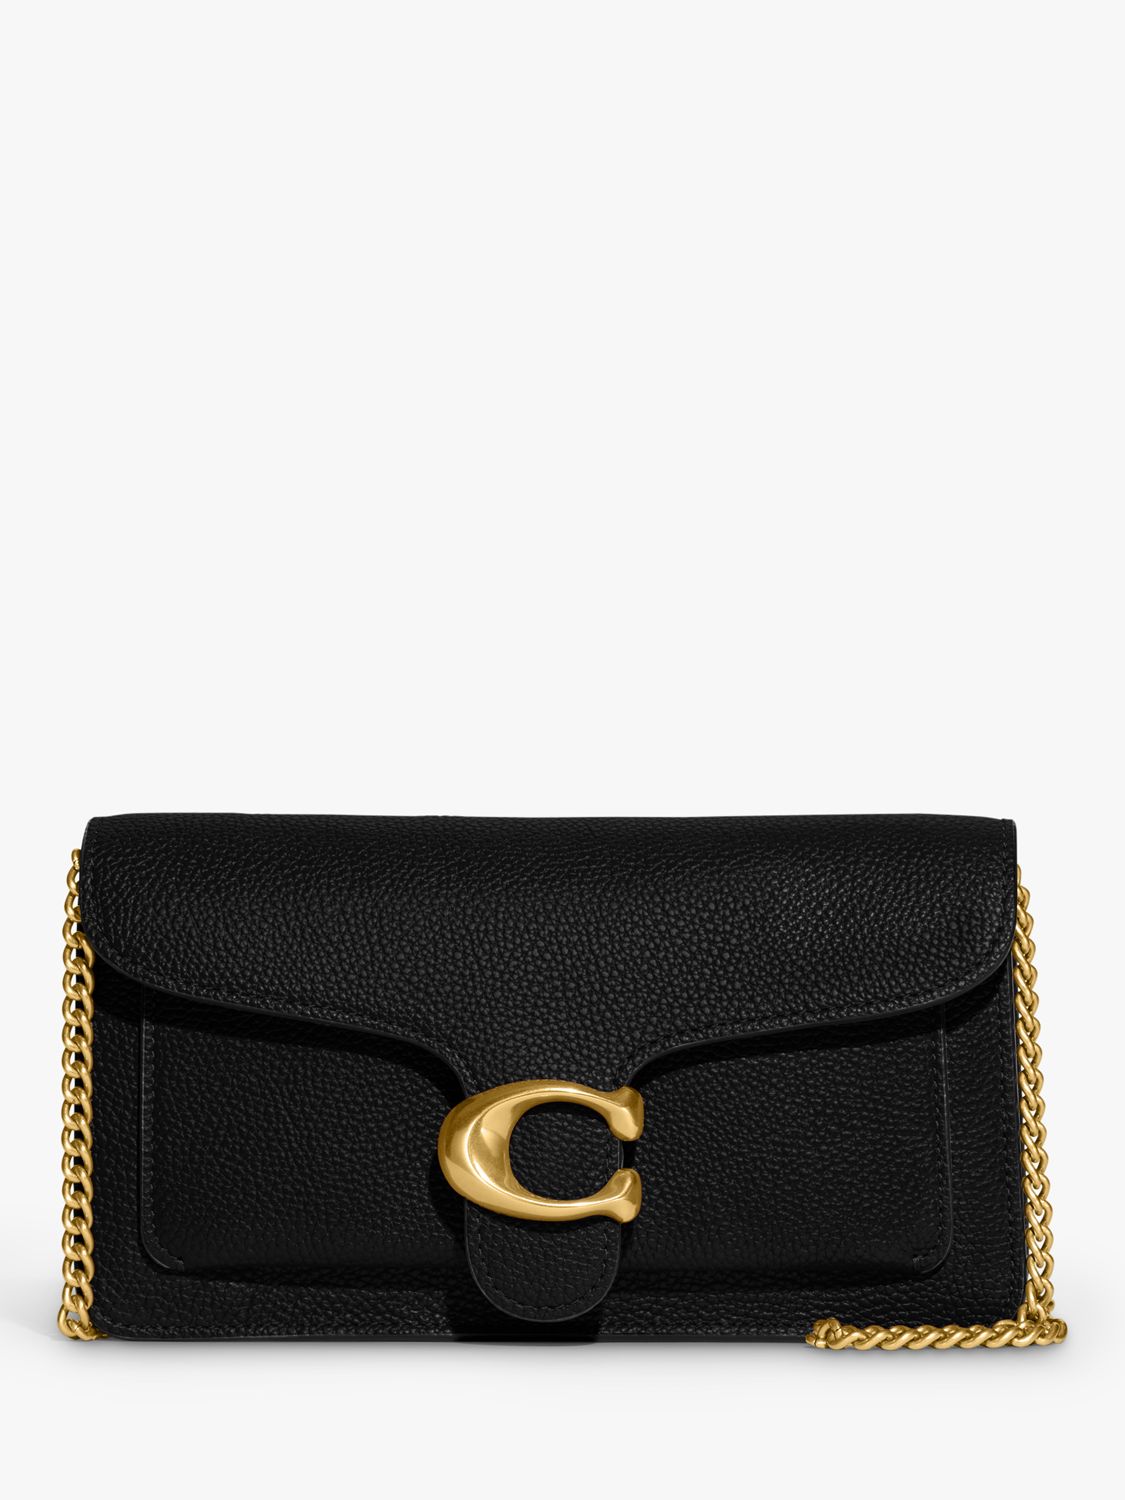 Coach Tabby Chain Leather Clutch Bag, Black at John Lewis & Partners